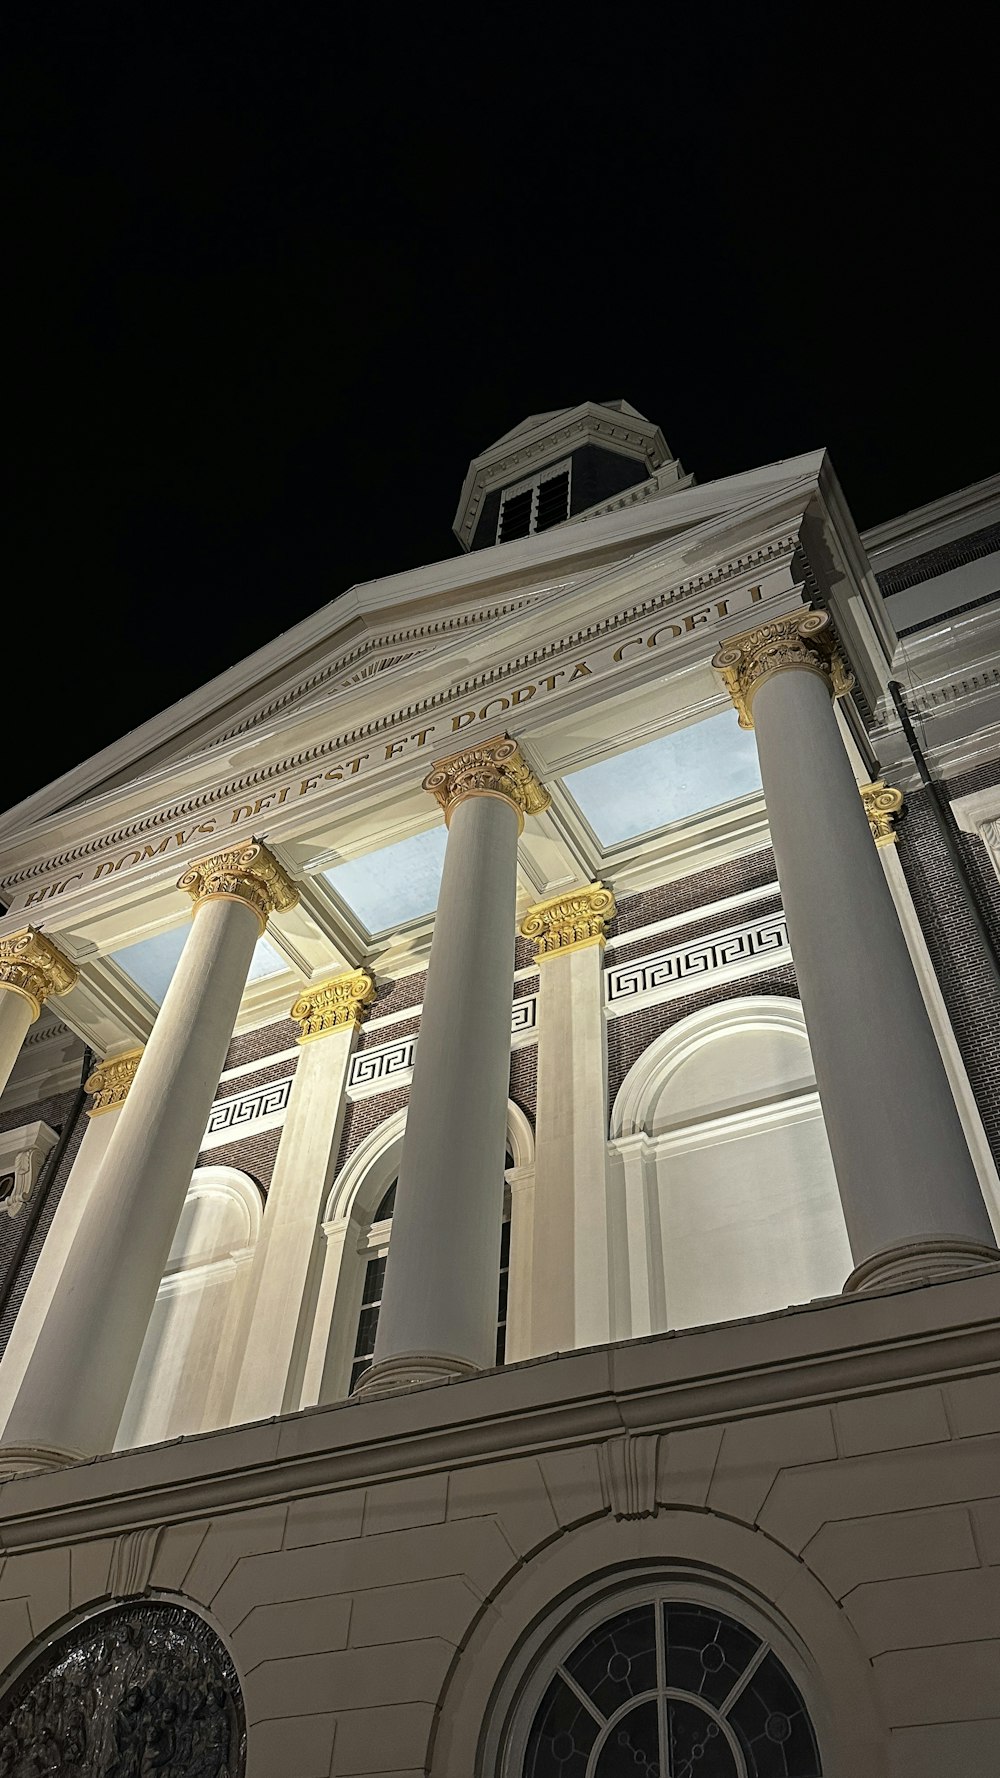 a building with columns and a dome